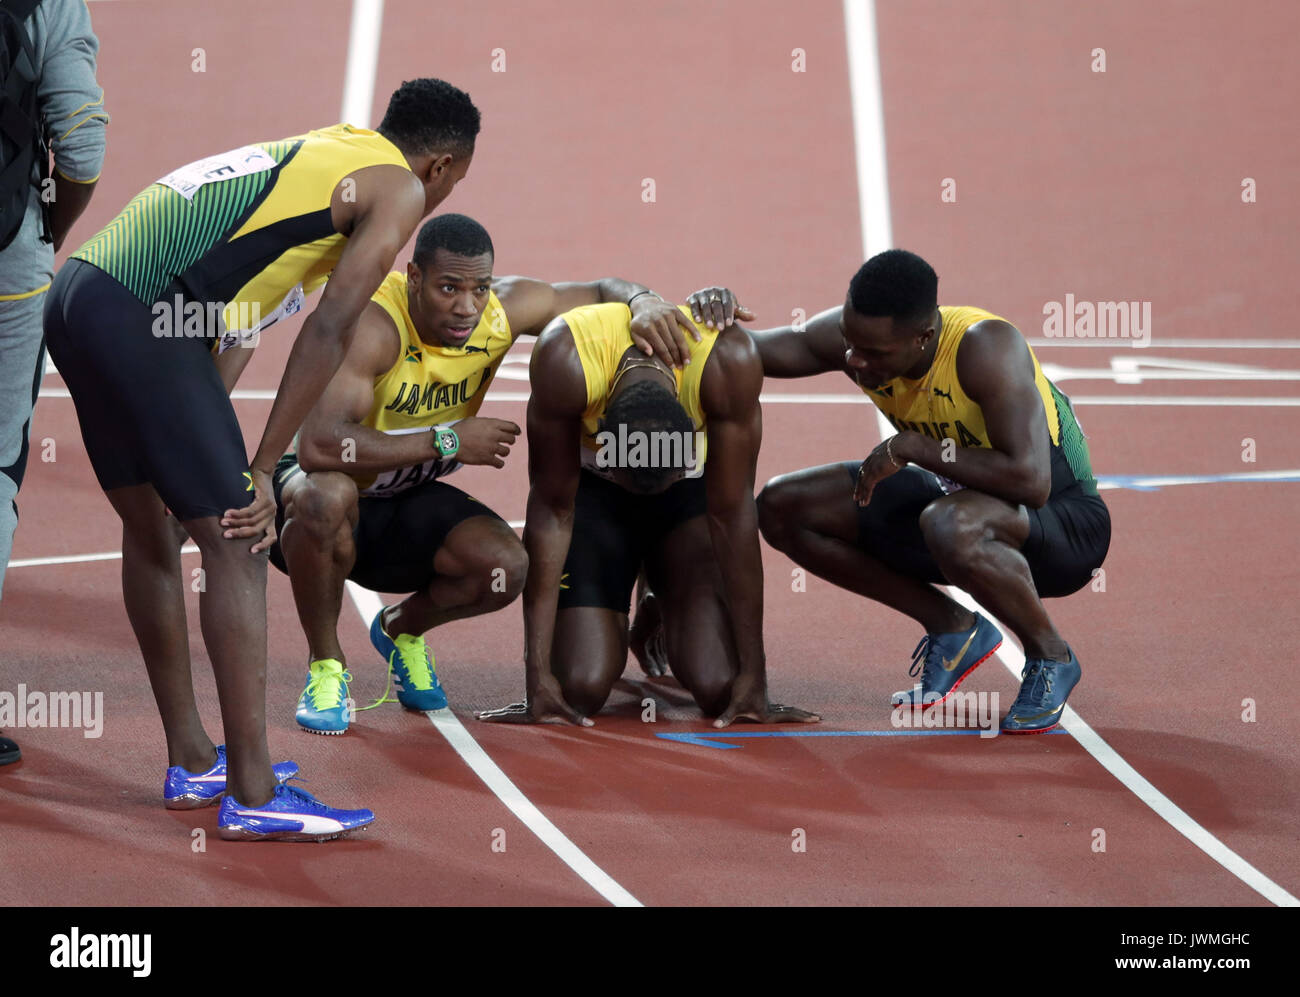 Jamaica's Usain Bolt is consoled by team-mates after pulling up injured in the Men's 4x100m Relay Final during day nine of the 2017 IAAF World Championships at the London Stadium. Picture date: Saturday August 12, 2017. See PA story ATHLETICS World. Photo credit should read: Yui Mok/PA Wire. RESTRICTIONS: Editorial use only. No transmission of sound or moving images and no video simulation. Stock Photo